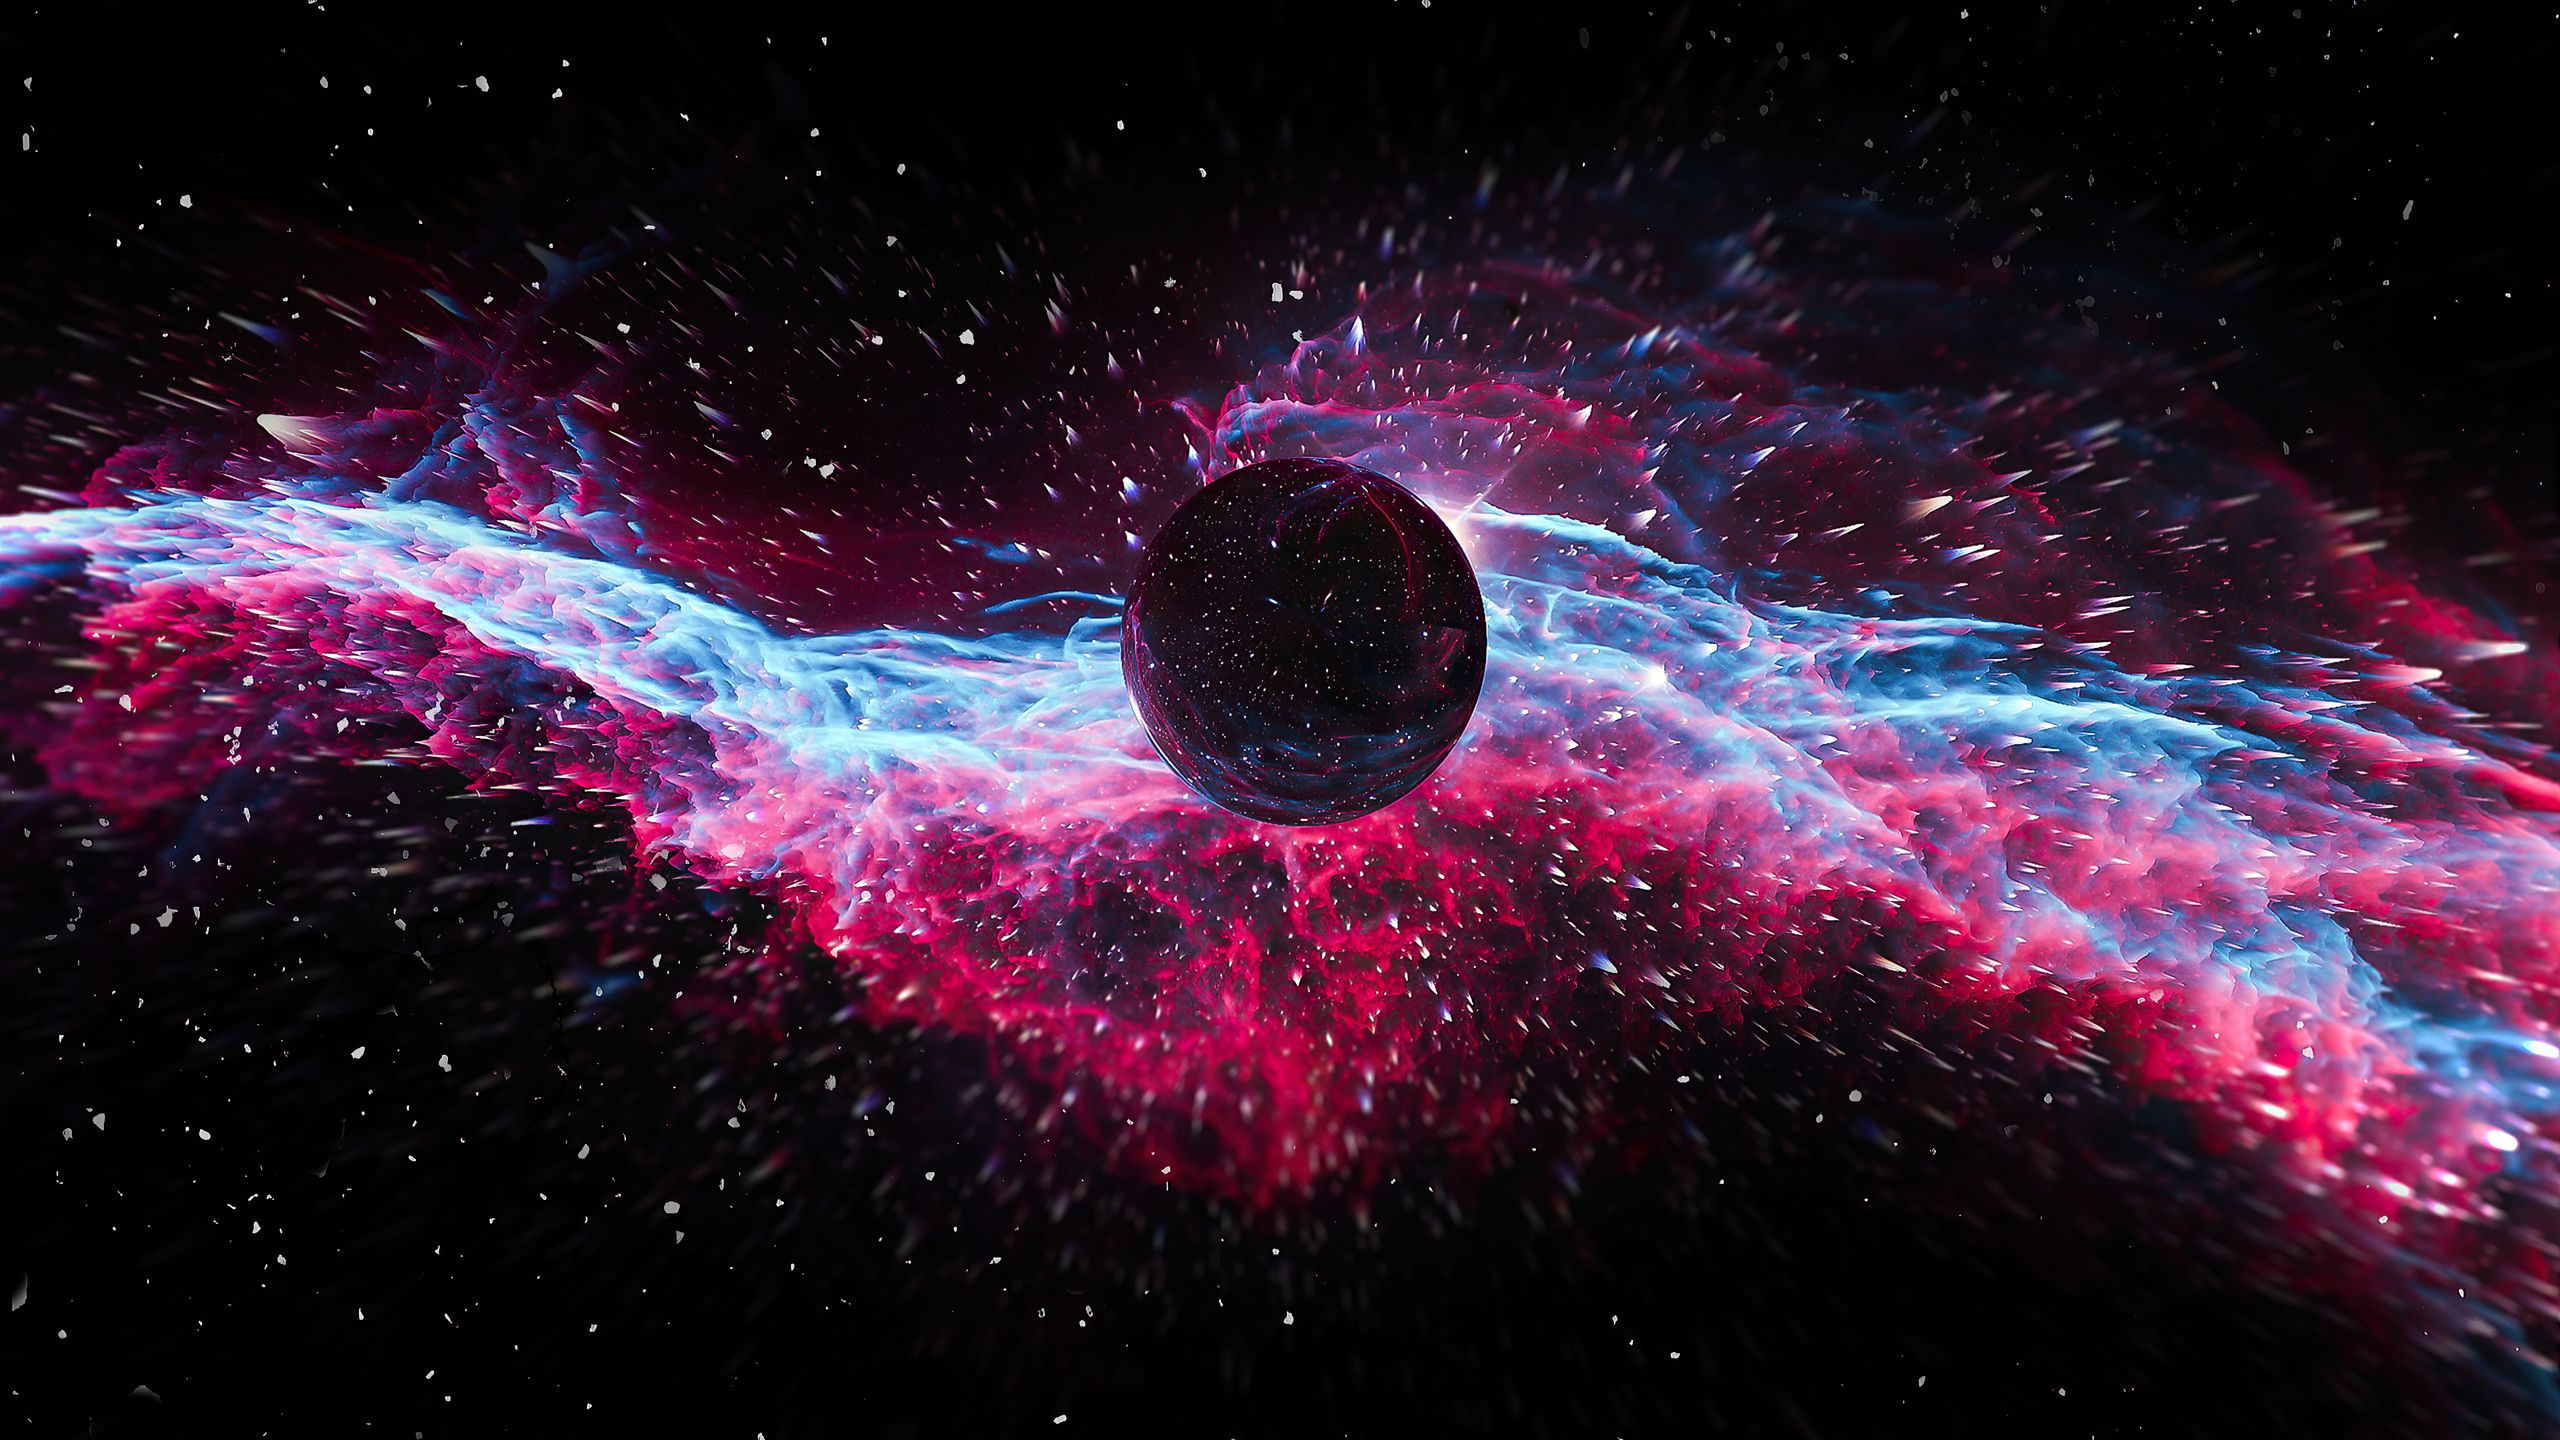 Scifi Space Black Hole 4k 1440P Resolution HD 4k Wallpaper, Image, Background, Photo and Picture